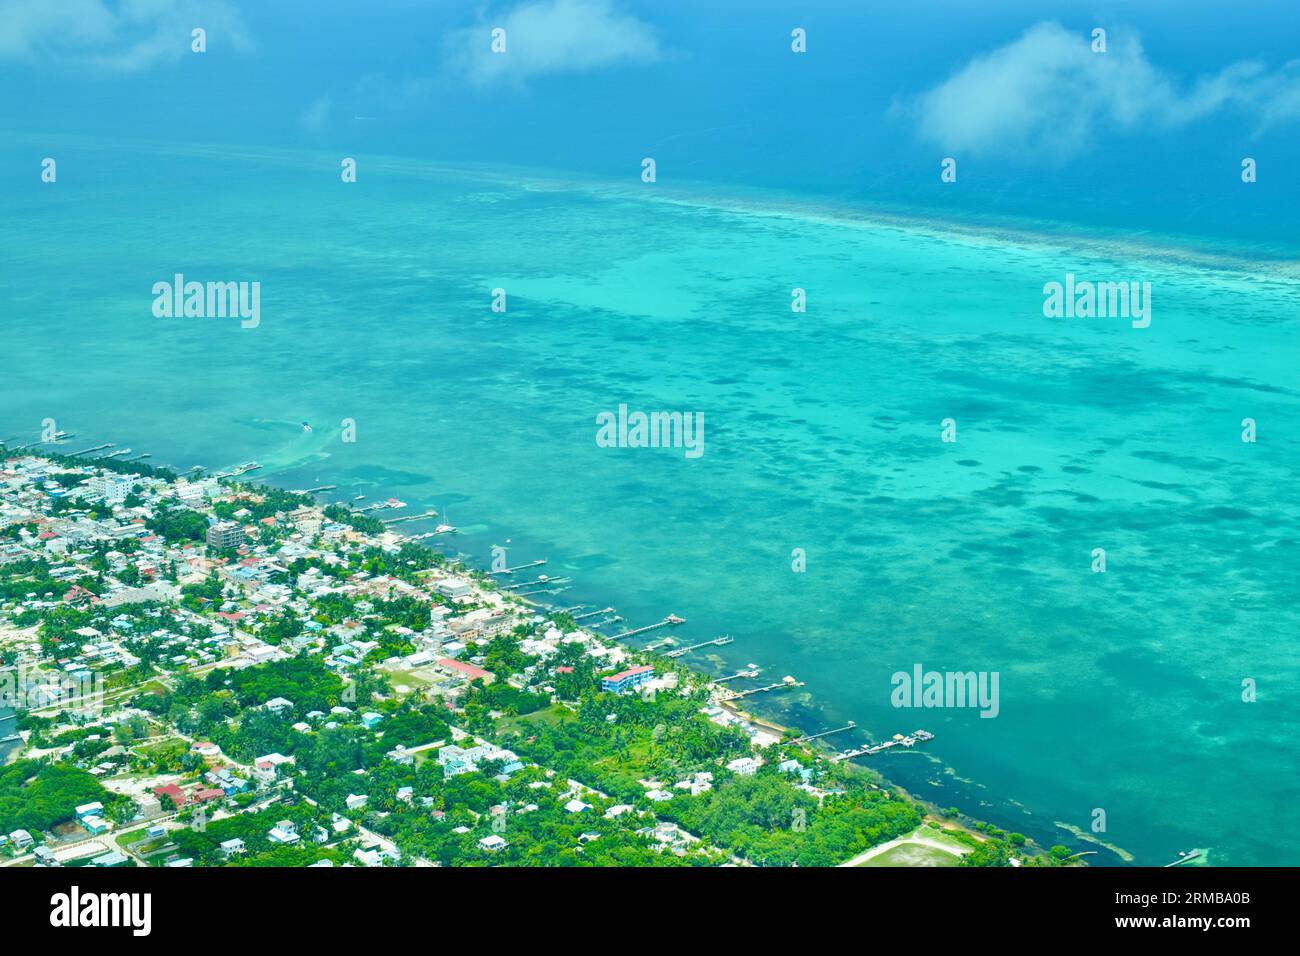 A view from the sky of Caye Caulker and the Belize Barrier Reef. Stock Photo